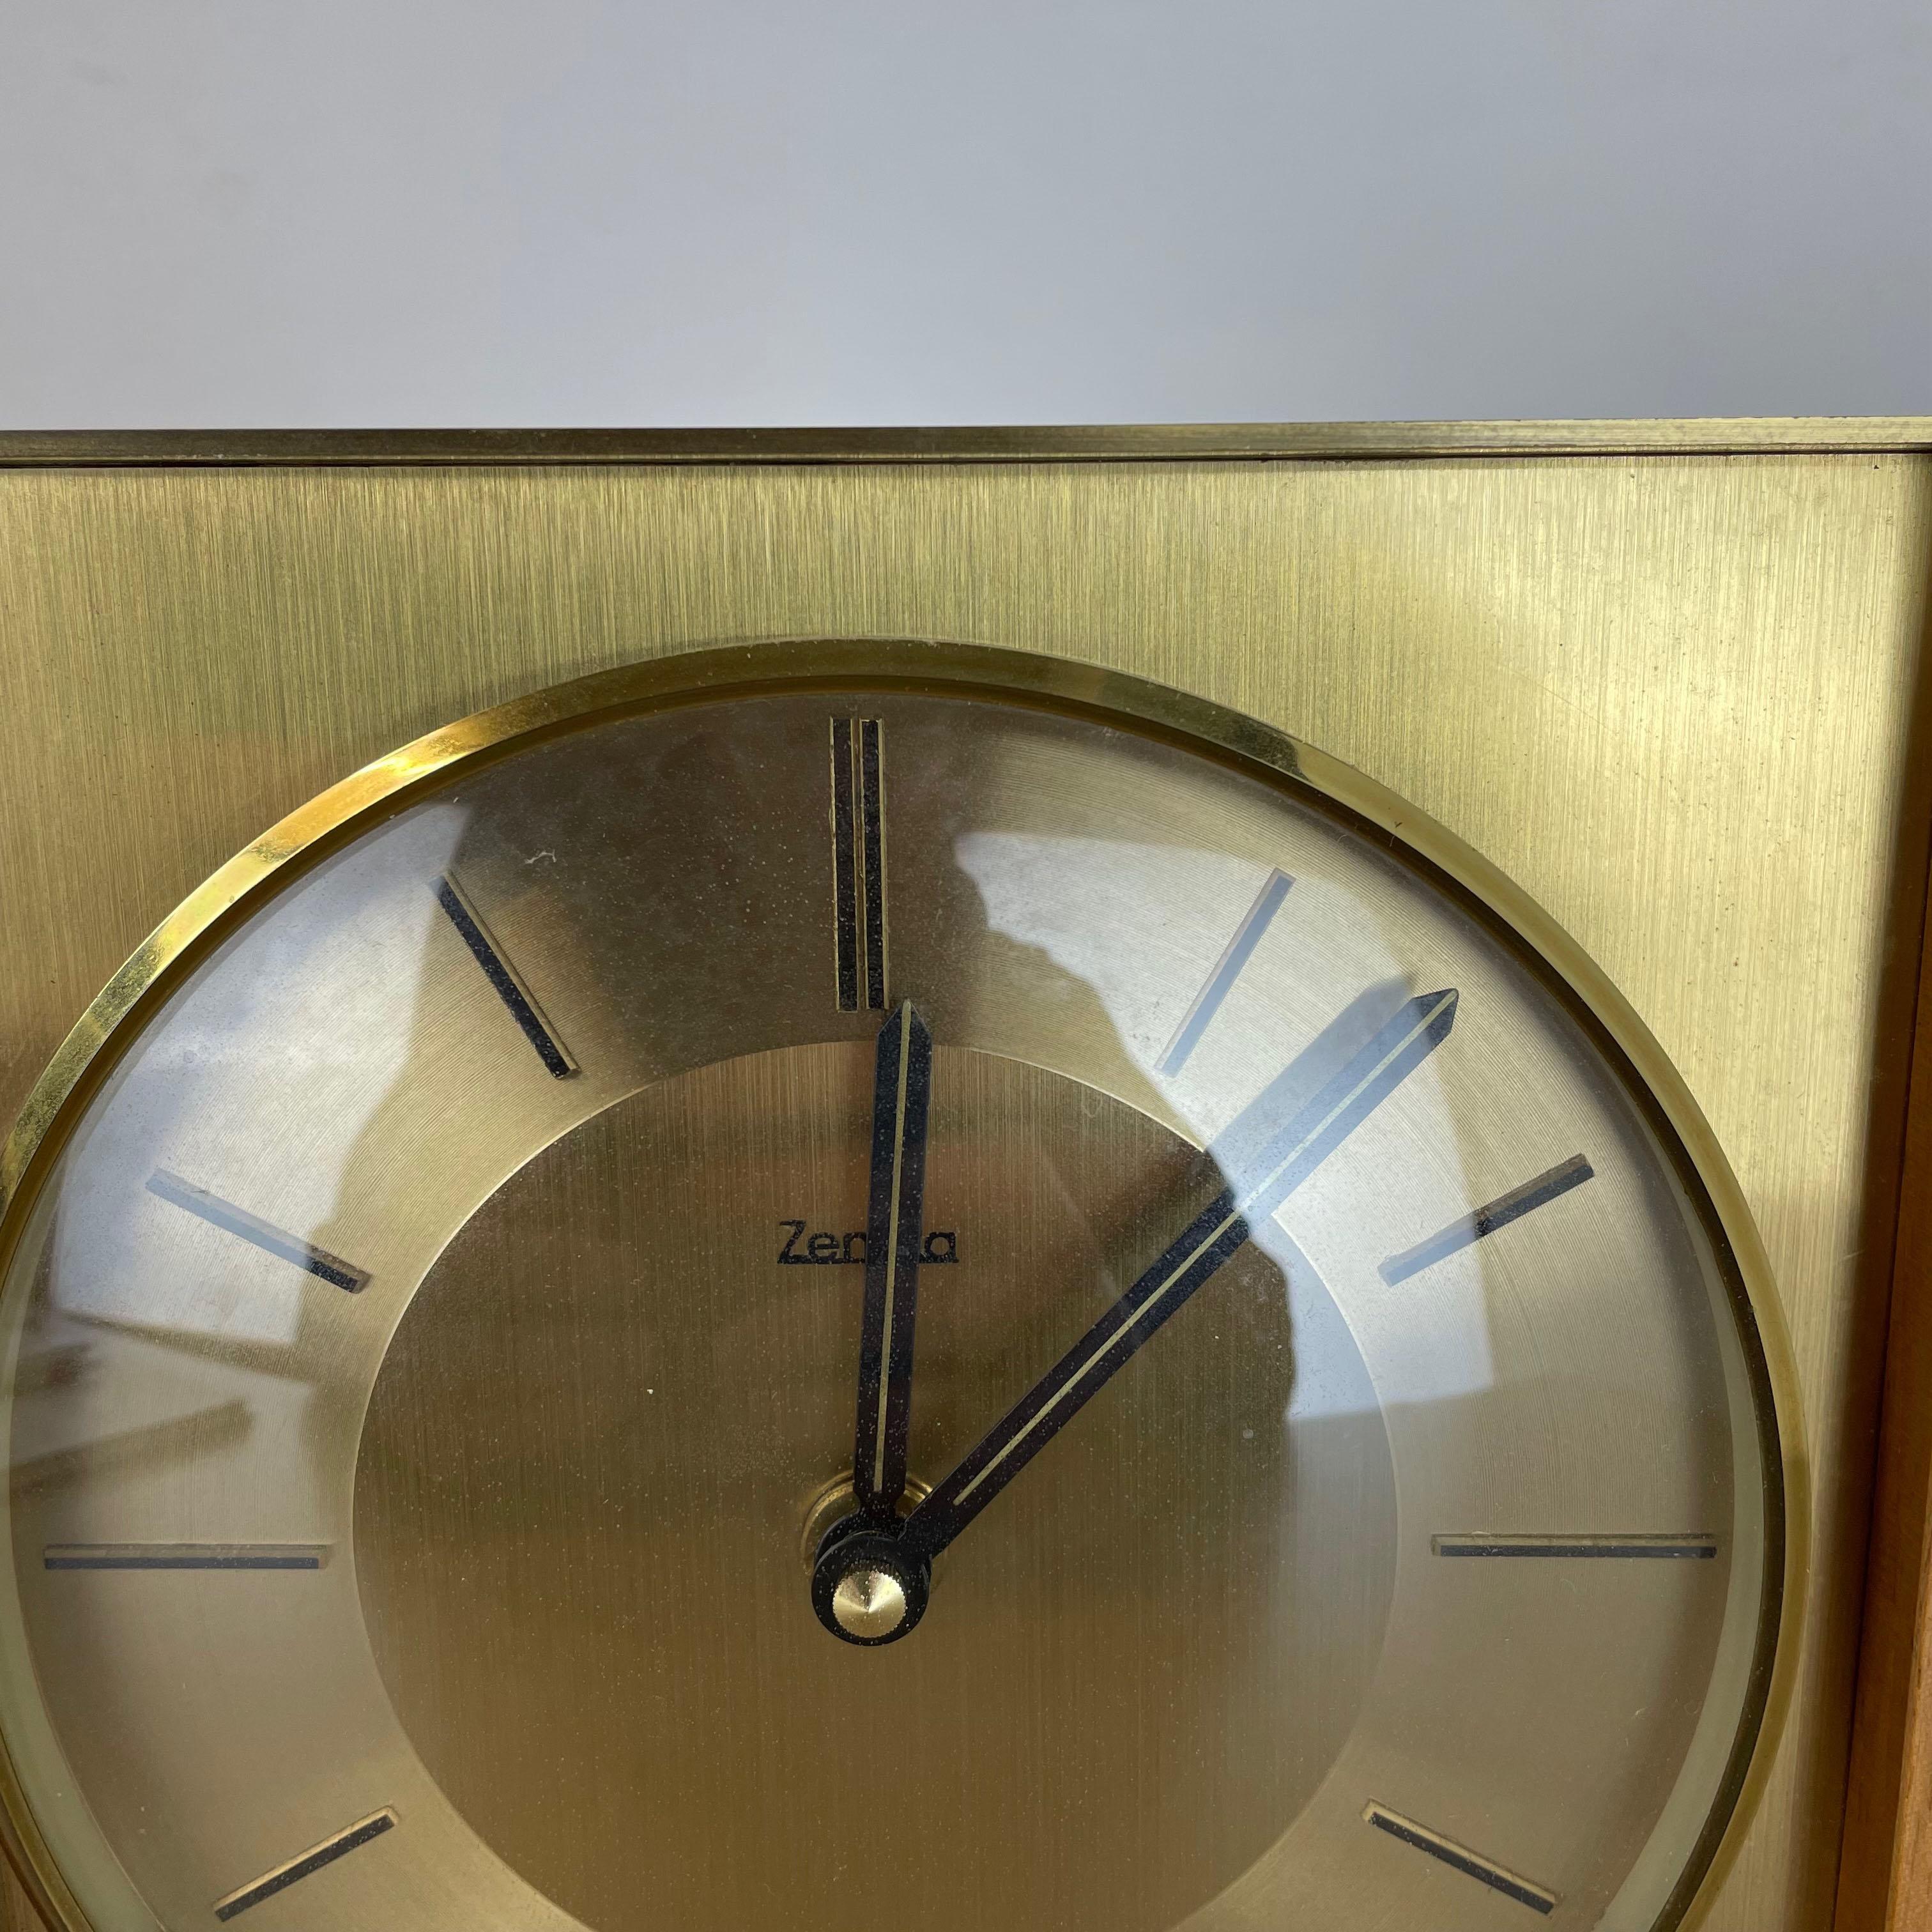 Vintage Modernist Wooden Teak Brass wall + Table Clock by Zentra, Germany In Good Condition For Sale In Kirchlengern, DE